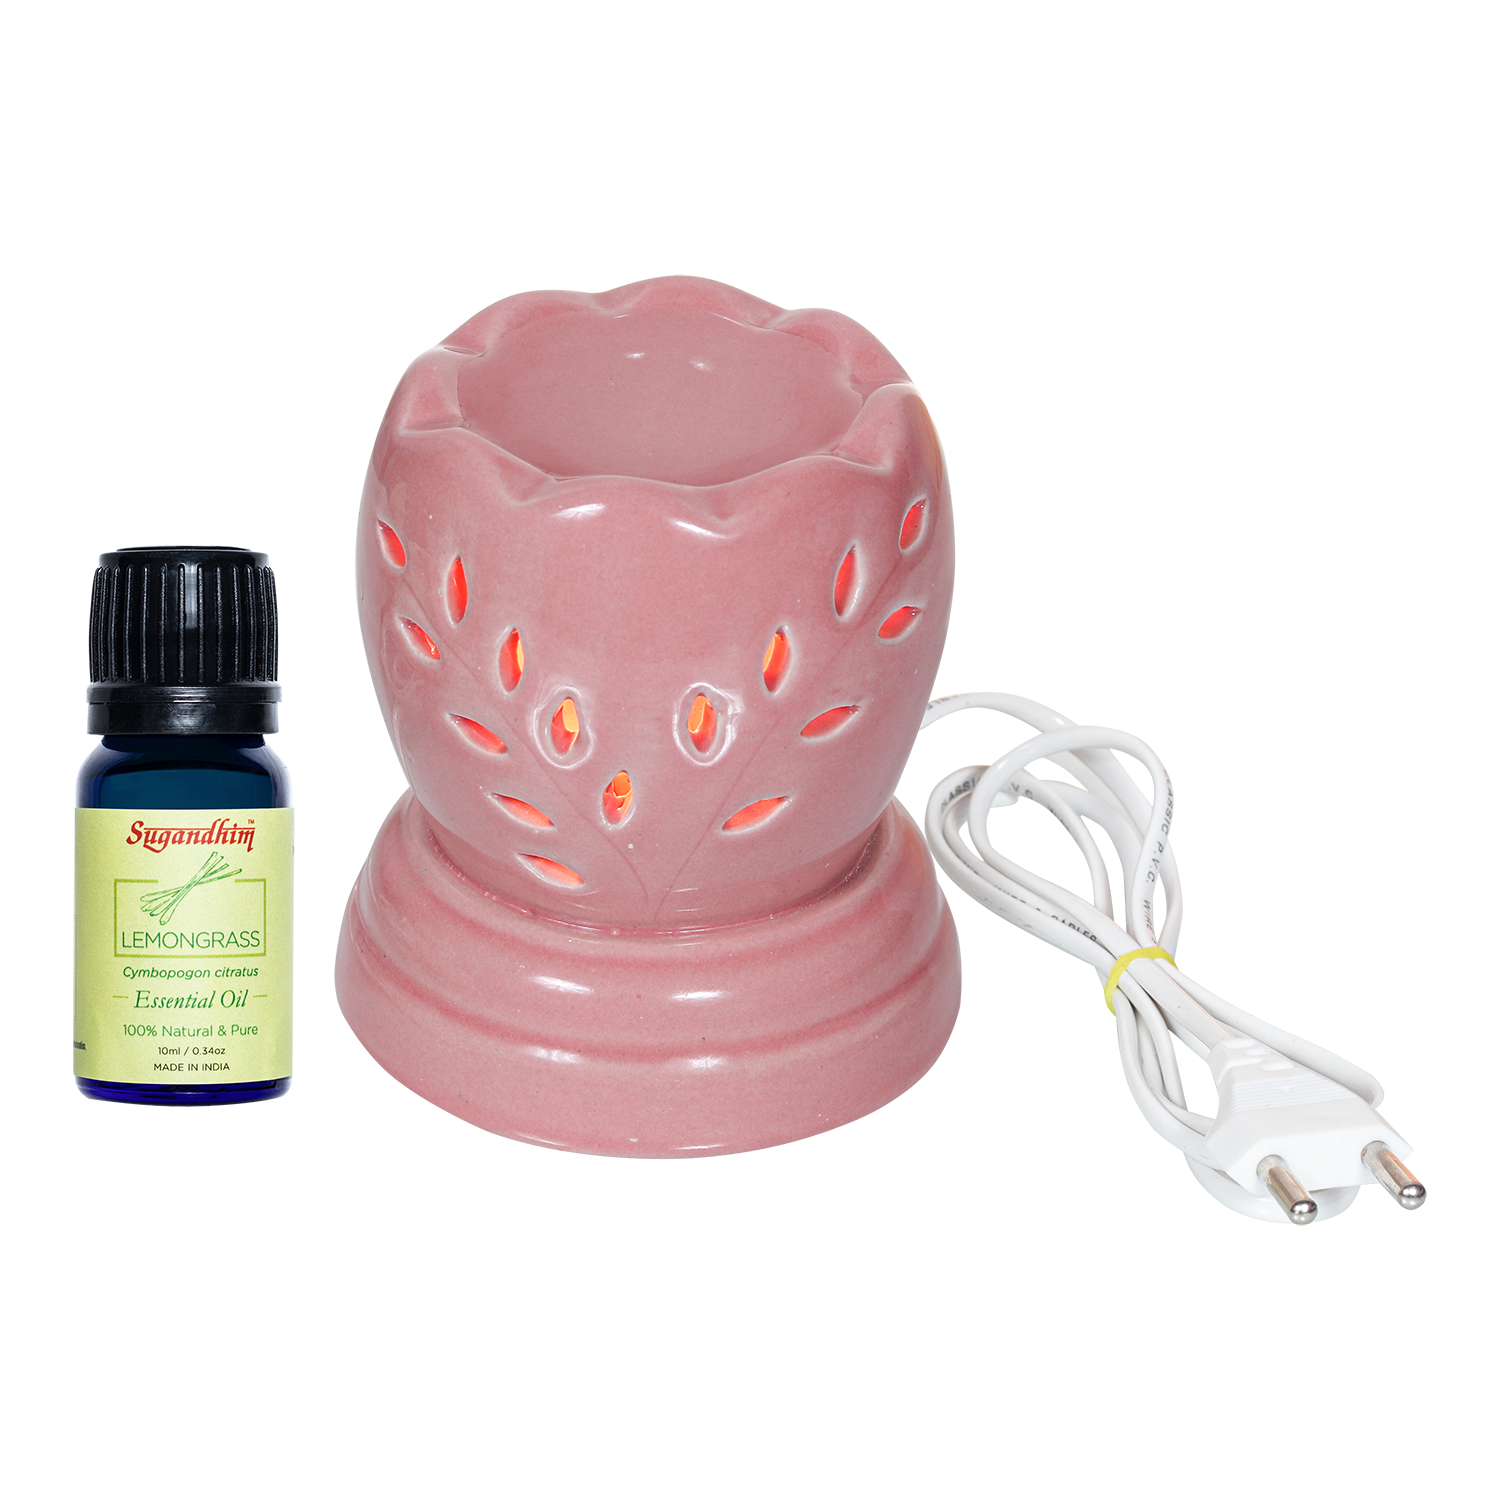 Electric Diffuser with 10ml Lemongrass Essential Oil - Charming Pink Colour